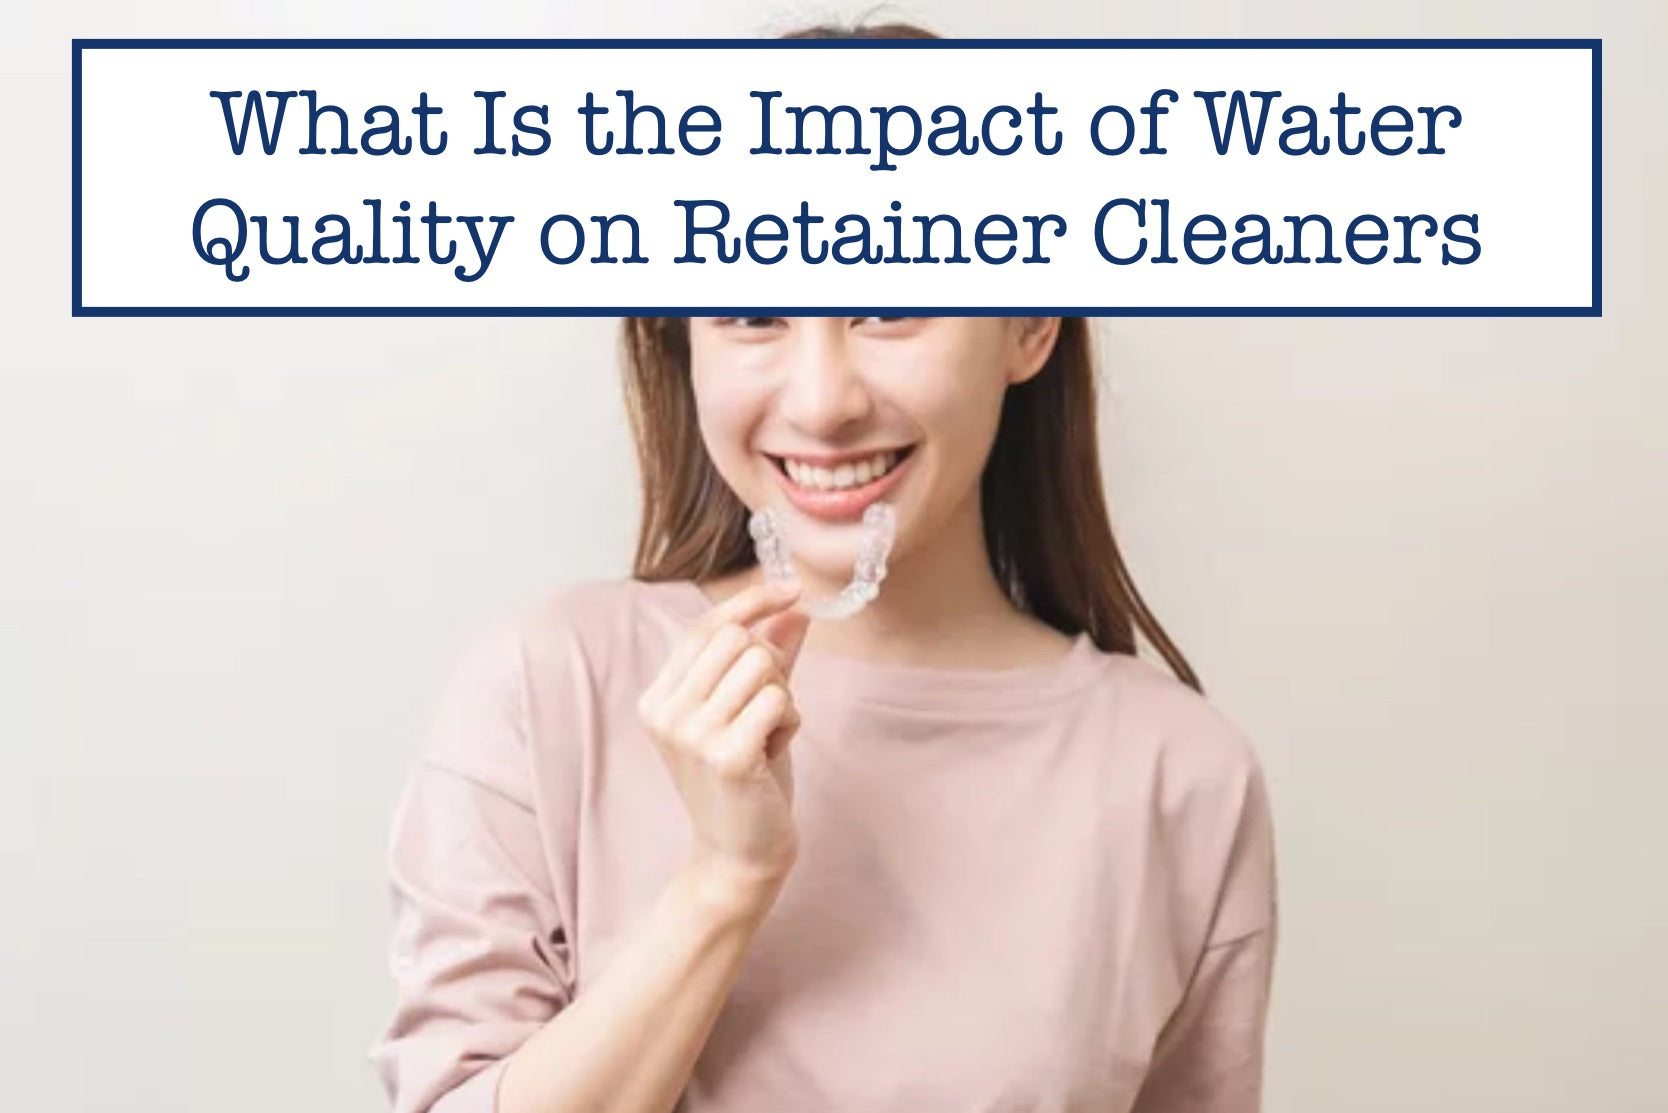 What Is the Impact of Water Quality on Retainer Cleaners